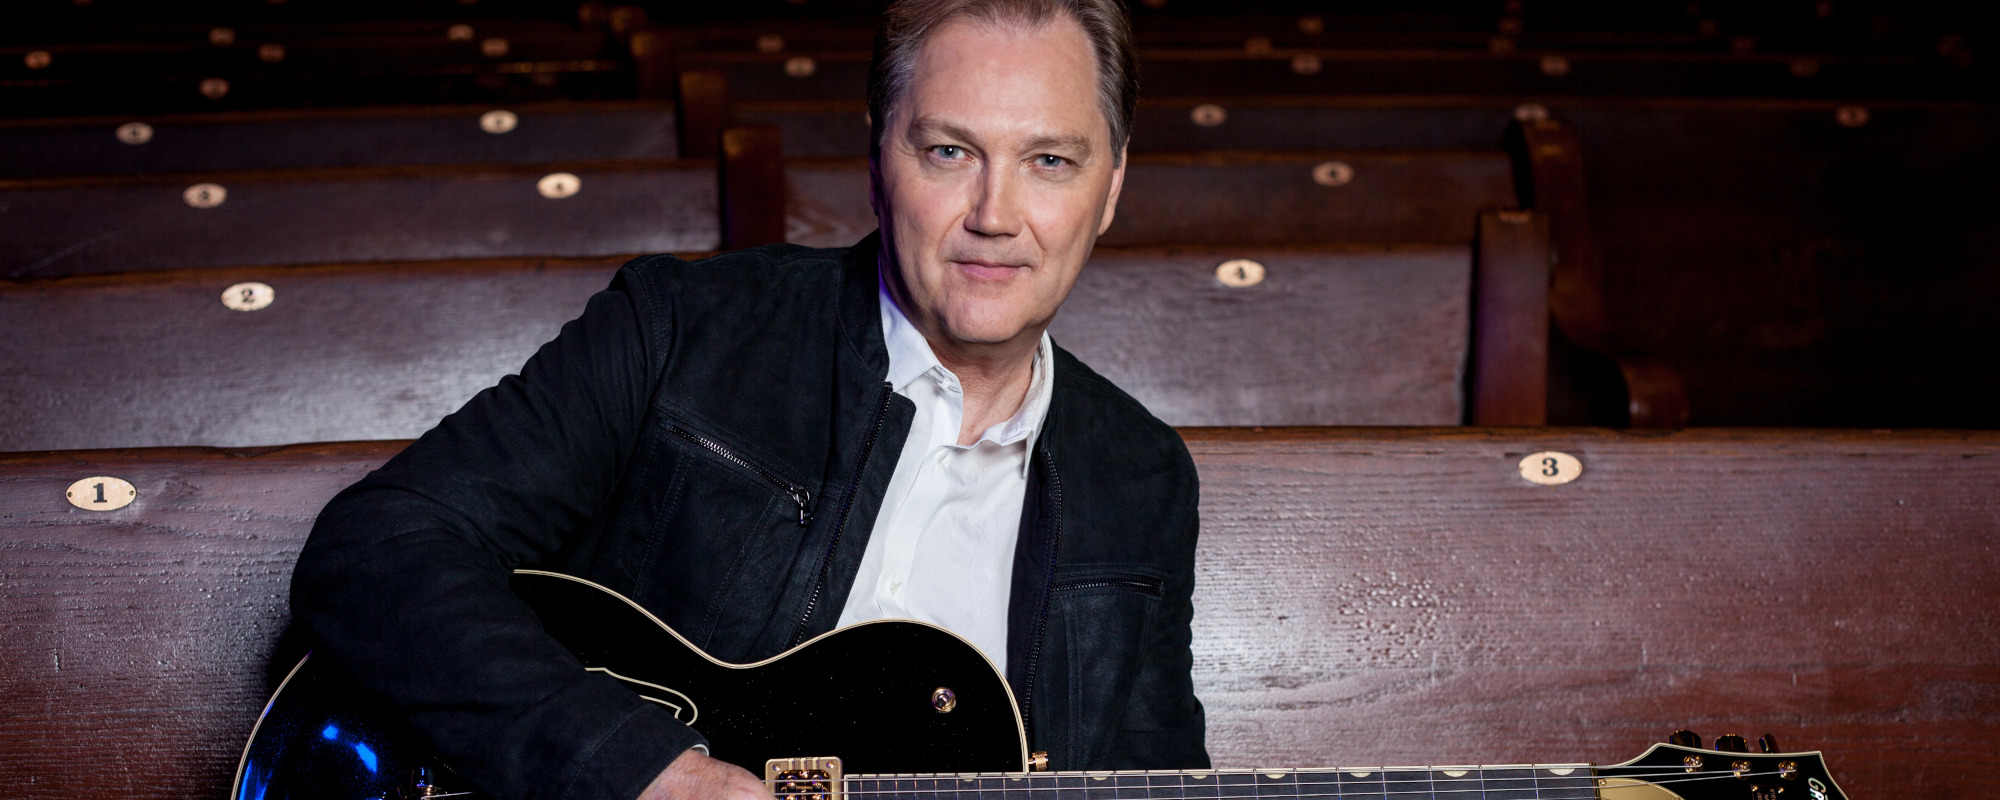 Steve Wariner is Warming Up the Season with “It Won’t Be Christmas” from Forthcoming Christmas Album